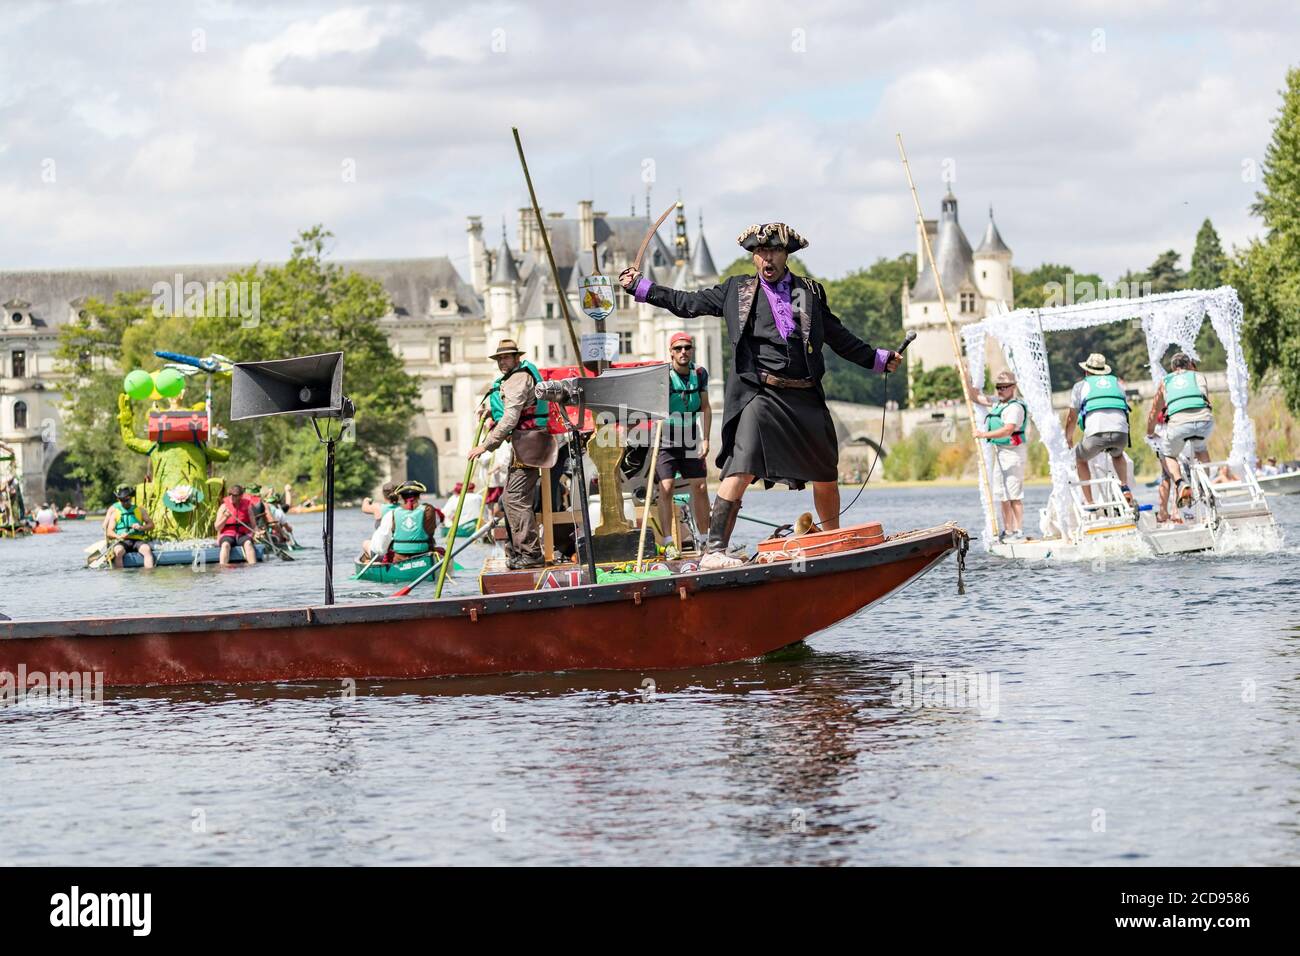 France, Indre et Loire, Cher valley, Jour de Cher, Chenonceaux, river parade, popular event imagined by the Blere - Val de Cher community of communes to highlight the Cher valley and its river heritage Stock Photo